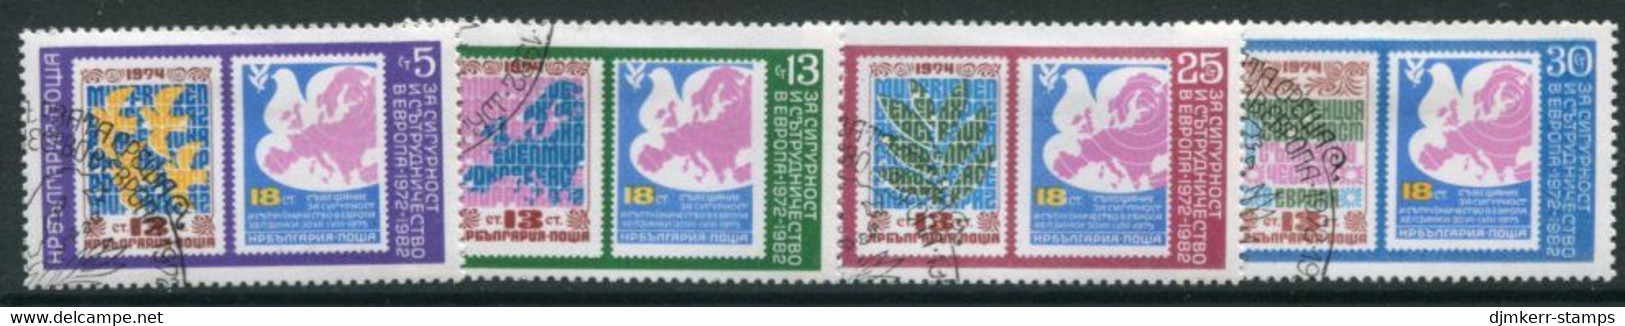 BULGARIA 1982 European Security Conference Used.  Michel 3119-22 - Used Stamps